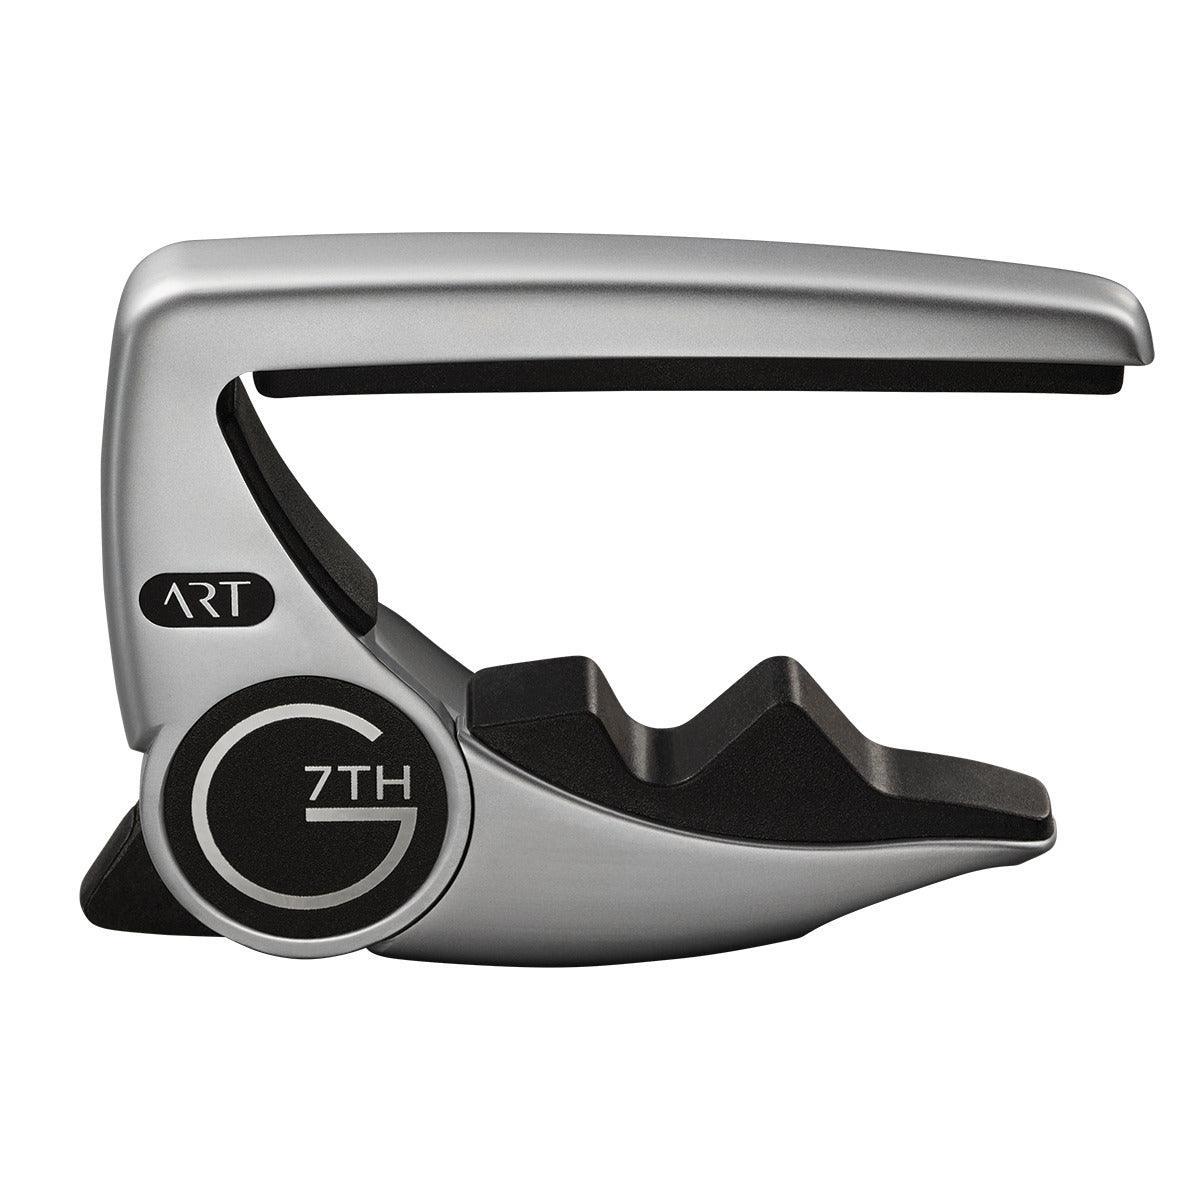 G7 Performance 3 Silver Guitar Capo - Capos by G7th at Muso's Stuff